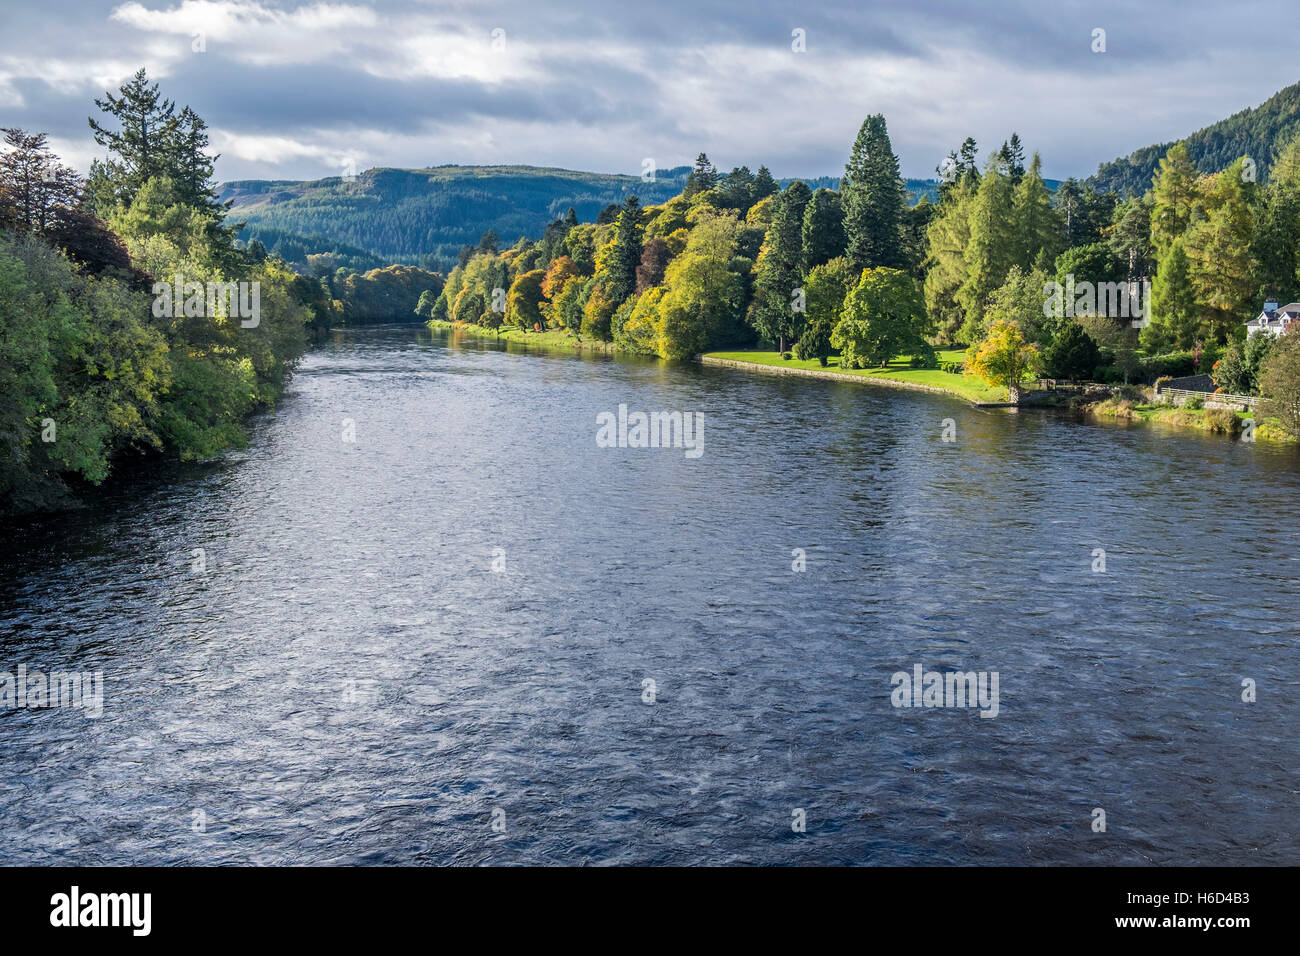 River Tay flowing through the village of Dunkeld, Scotland Stock Photo